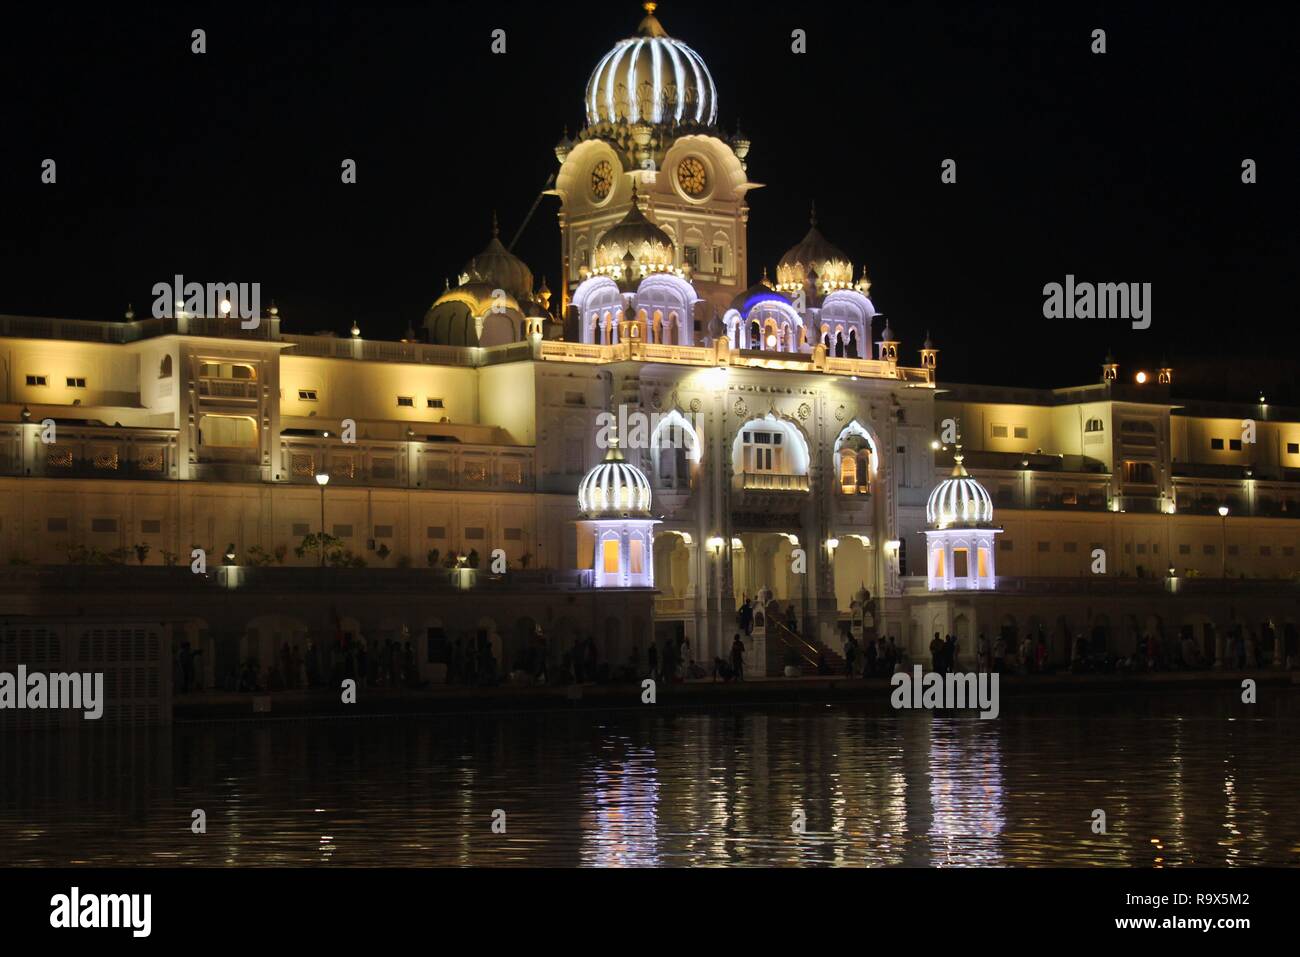 Golden temple entrance at night Stock Photo